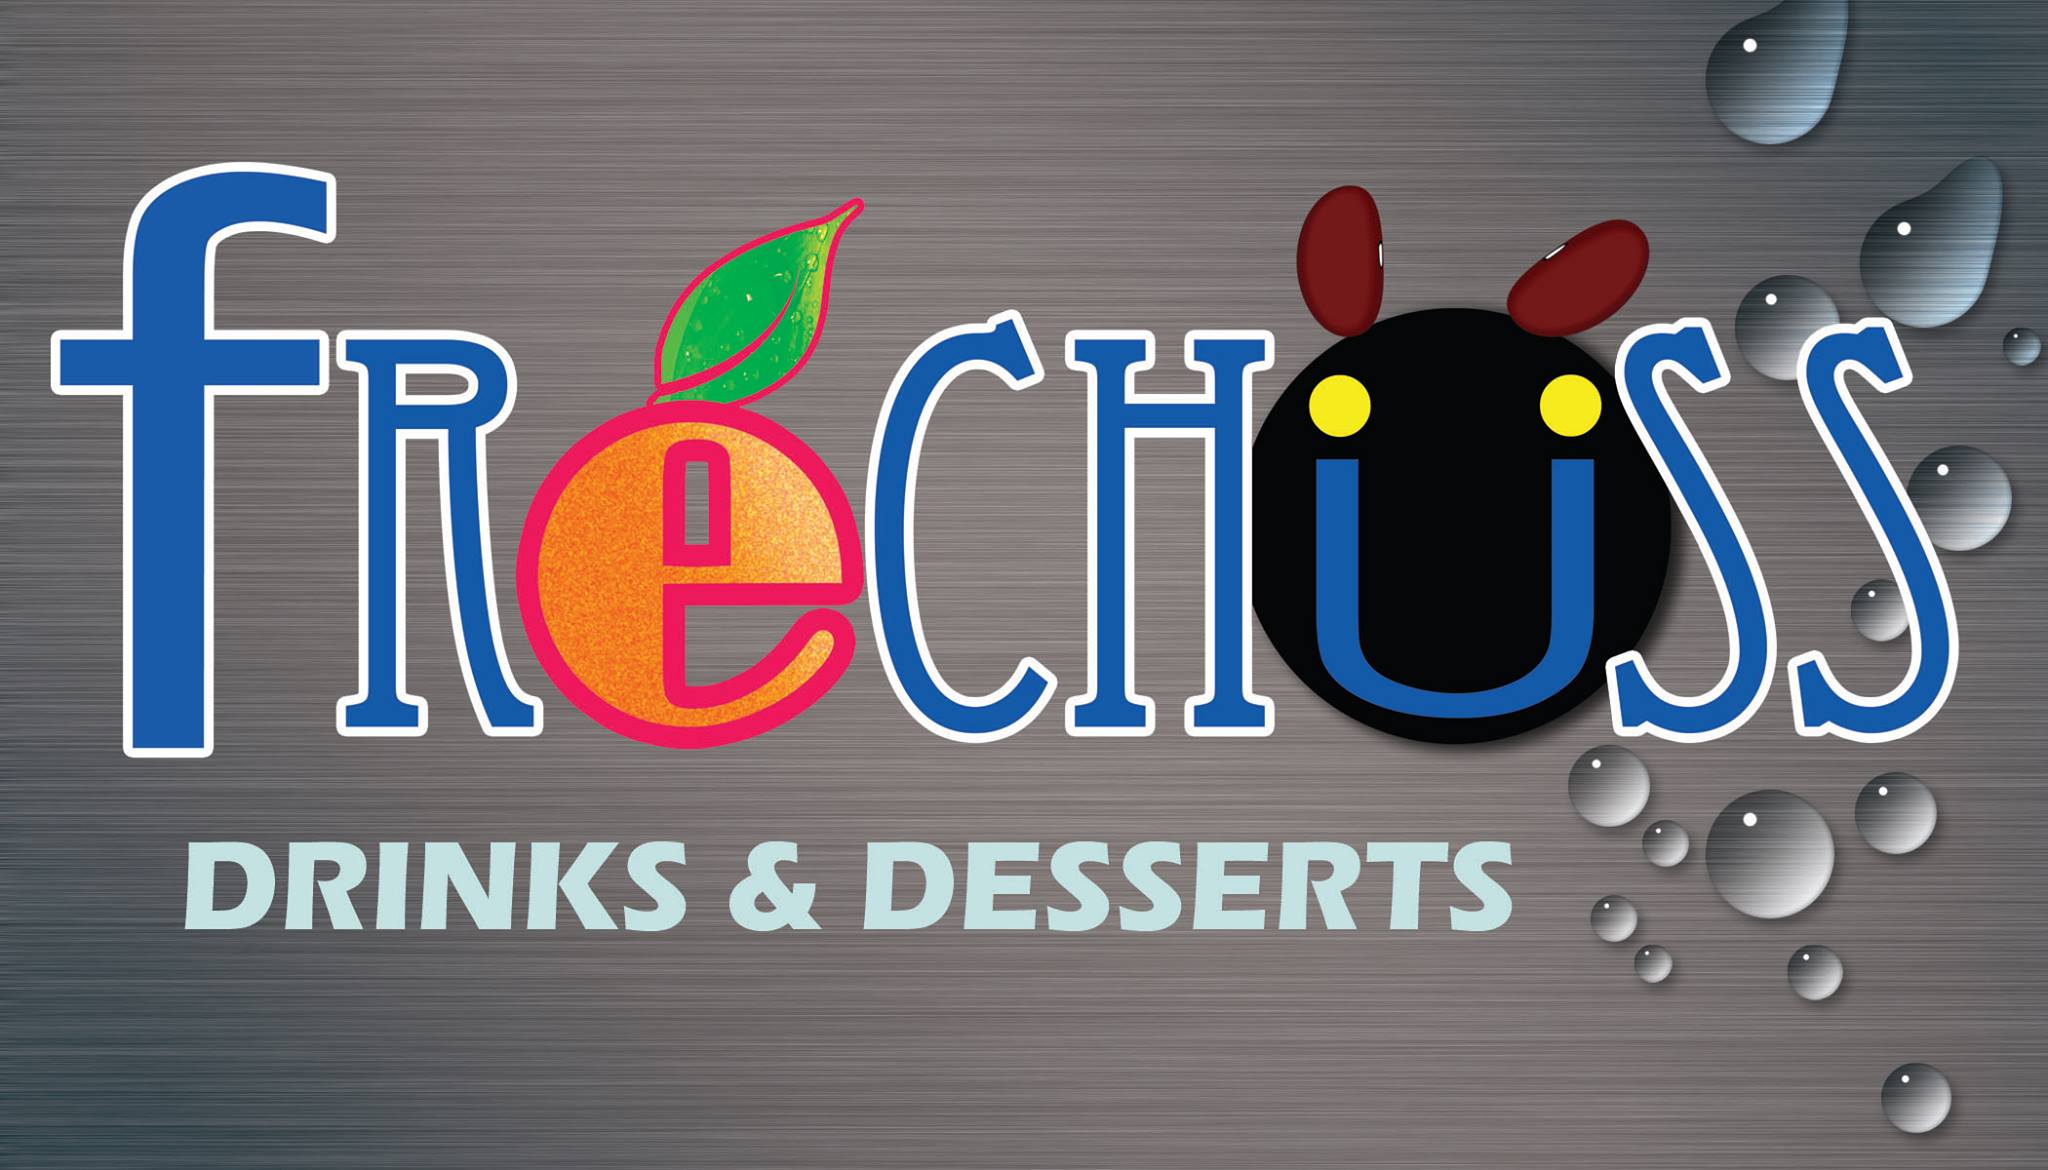 Frechuss Drinks and Desserts 